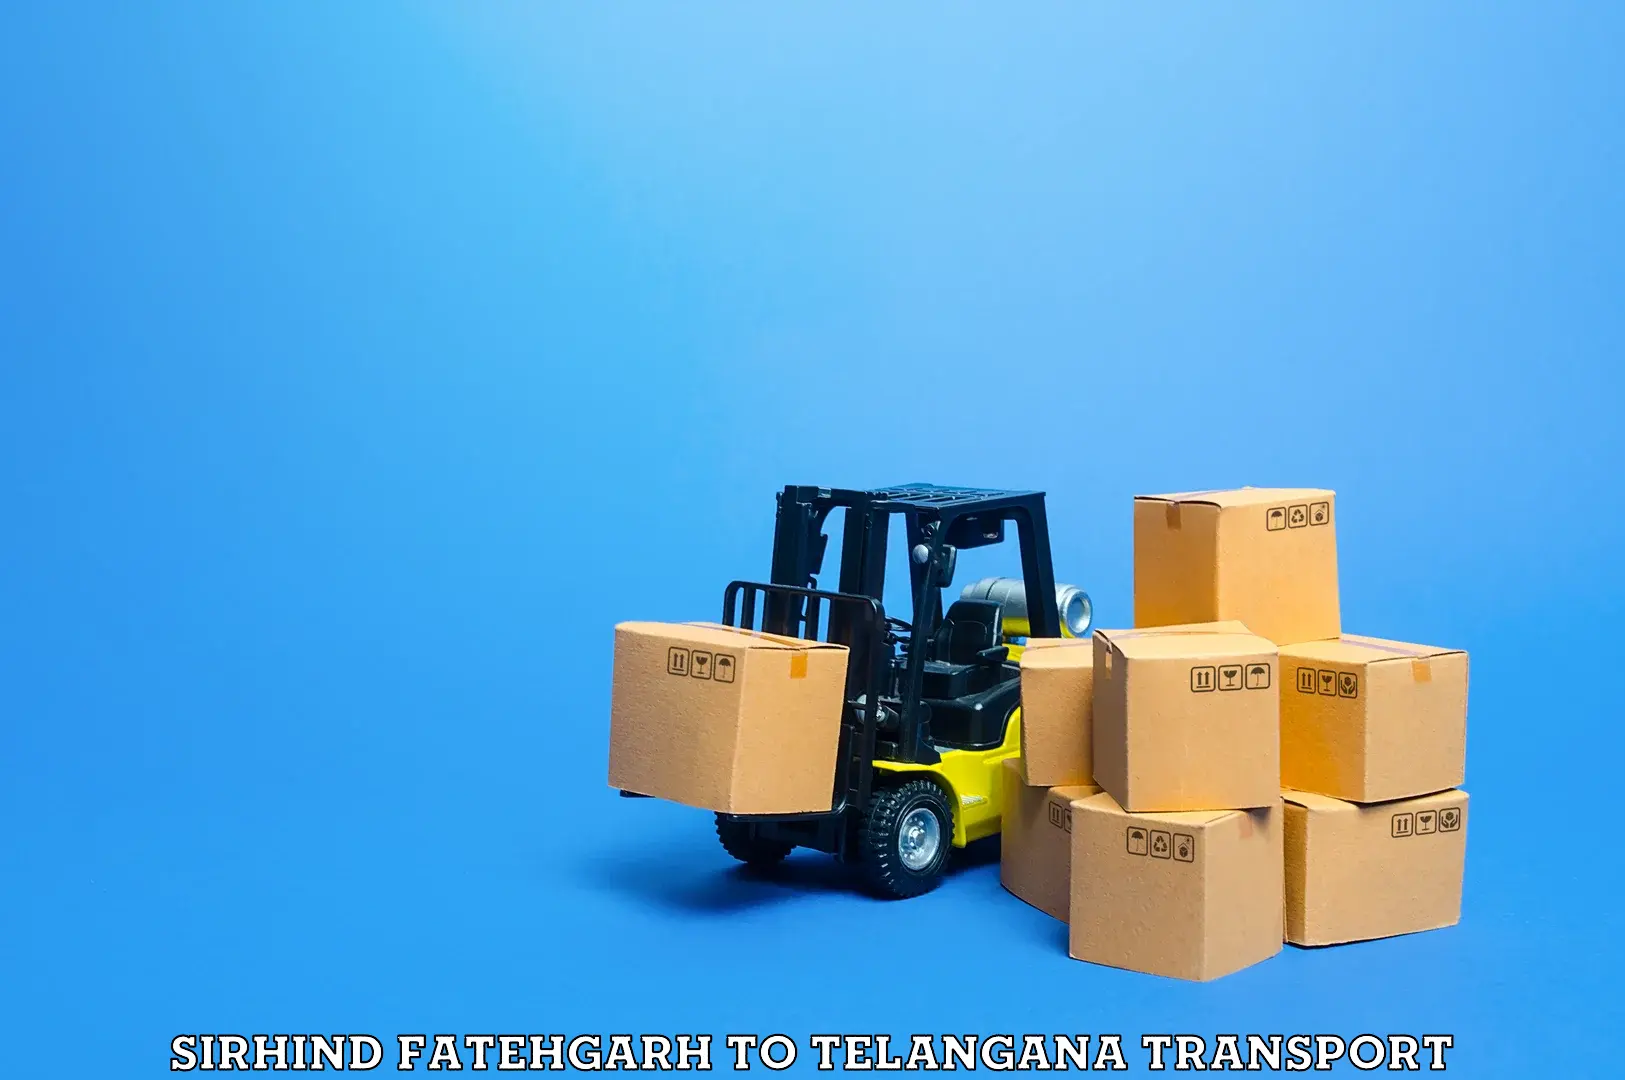 Truck transport companies in India Sirhind Fatehgarh to Sathupally